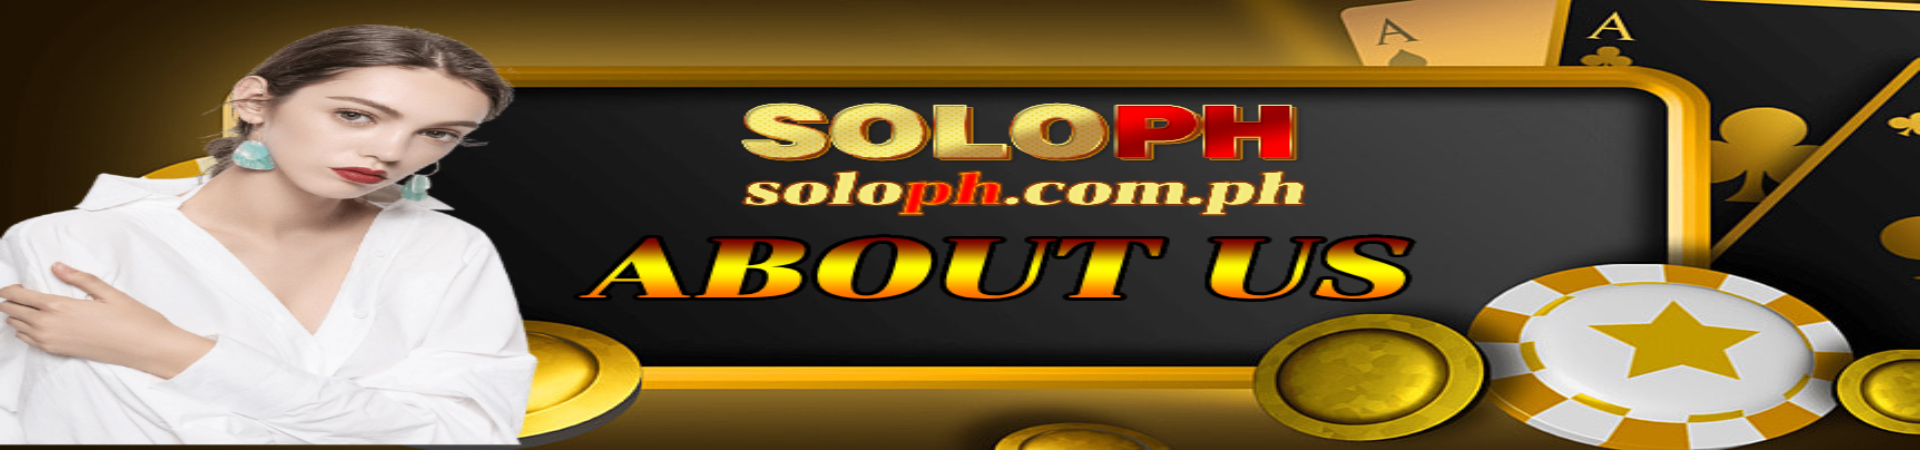 about us soloph banner